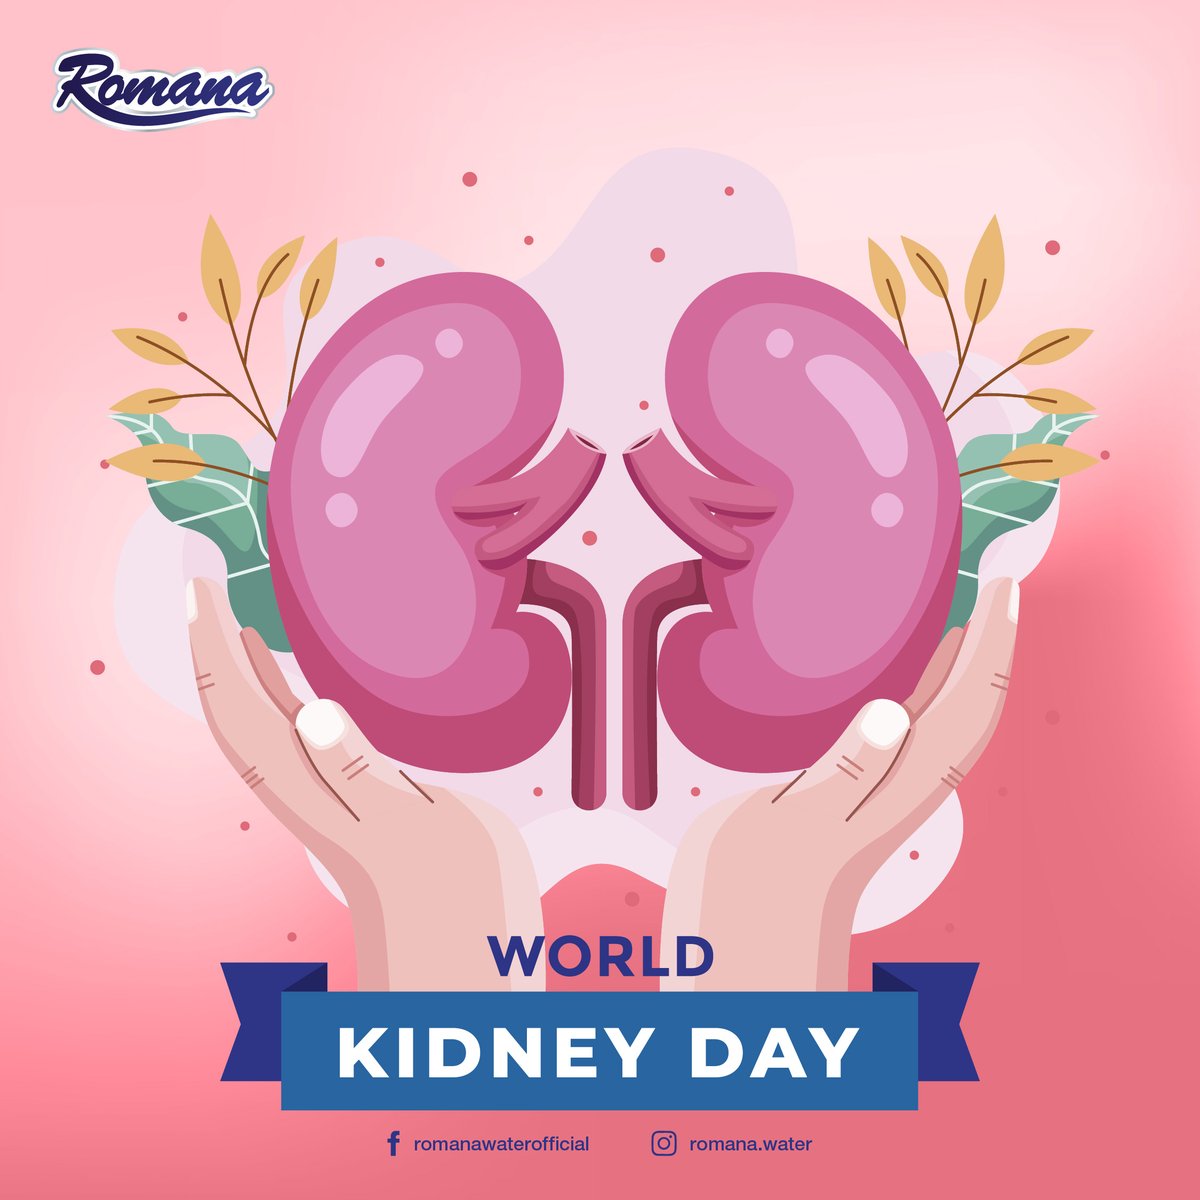 Pouring good vibes and kidney love with every sip! Cheers to World Kidney Day, brought to you by Romana. Stay hydrated, stay healthy! 💧💙 #WorldKidneyDay #RomanaWater #BalancedDrinkingWater #BottledWater